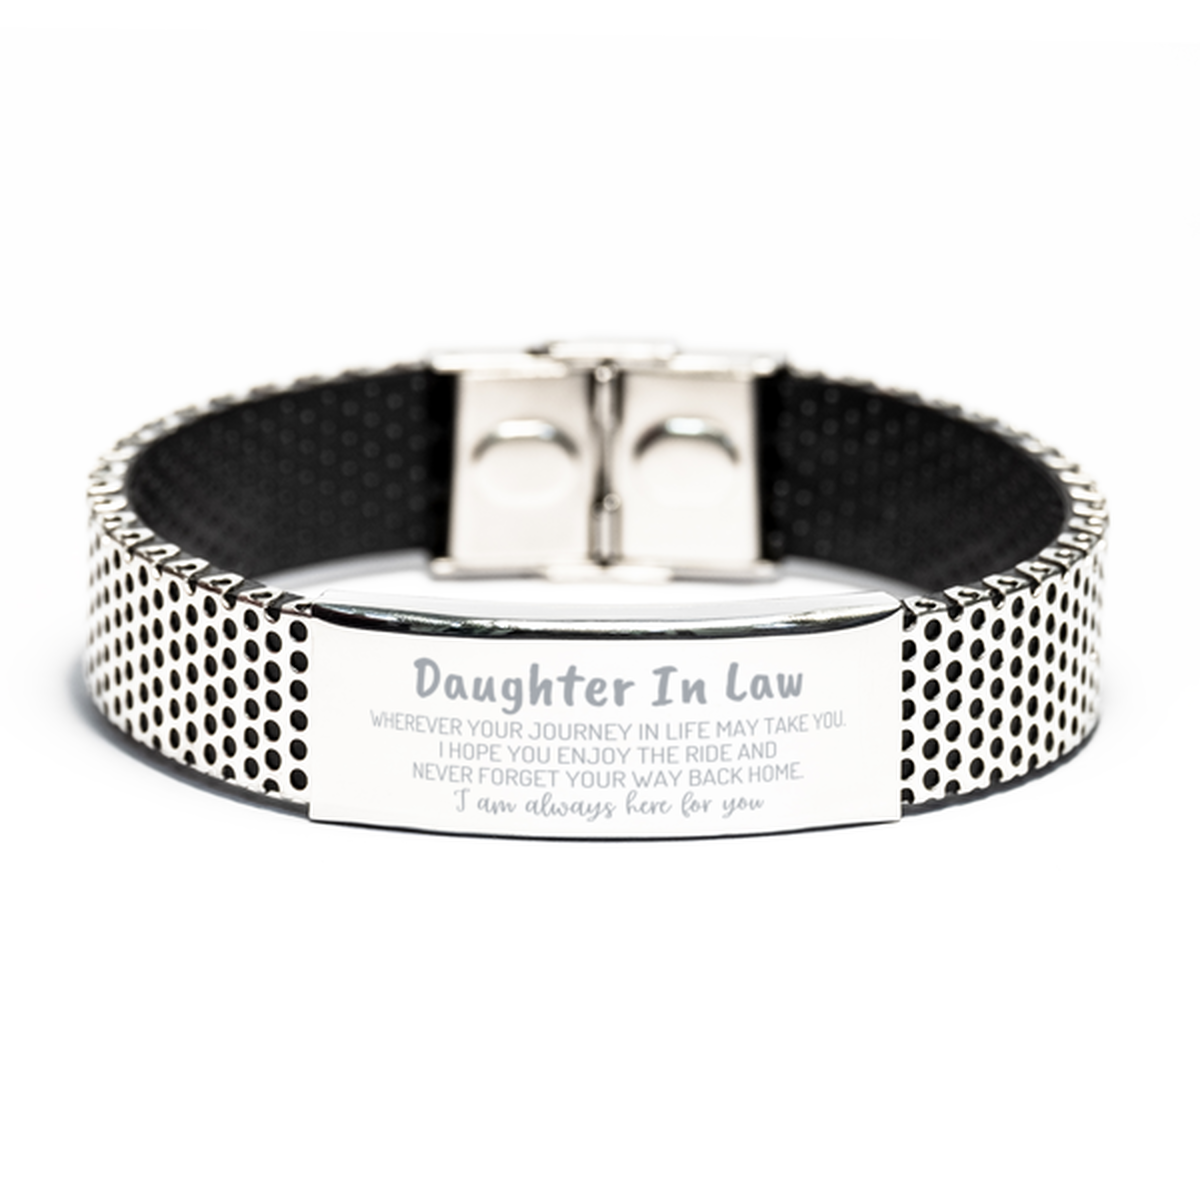 Daughter In Law wherever your journey in life may take you, I am always here for you Daughter In Law Stainless Steel Bracelet, Awesome Christmas Gifts For Daughter In Law, Daughter In Law Birthday Gifts for Men Women Family Loved One